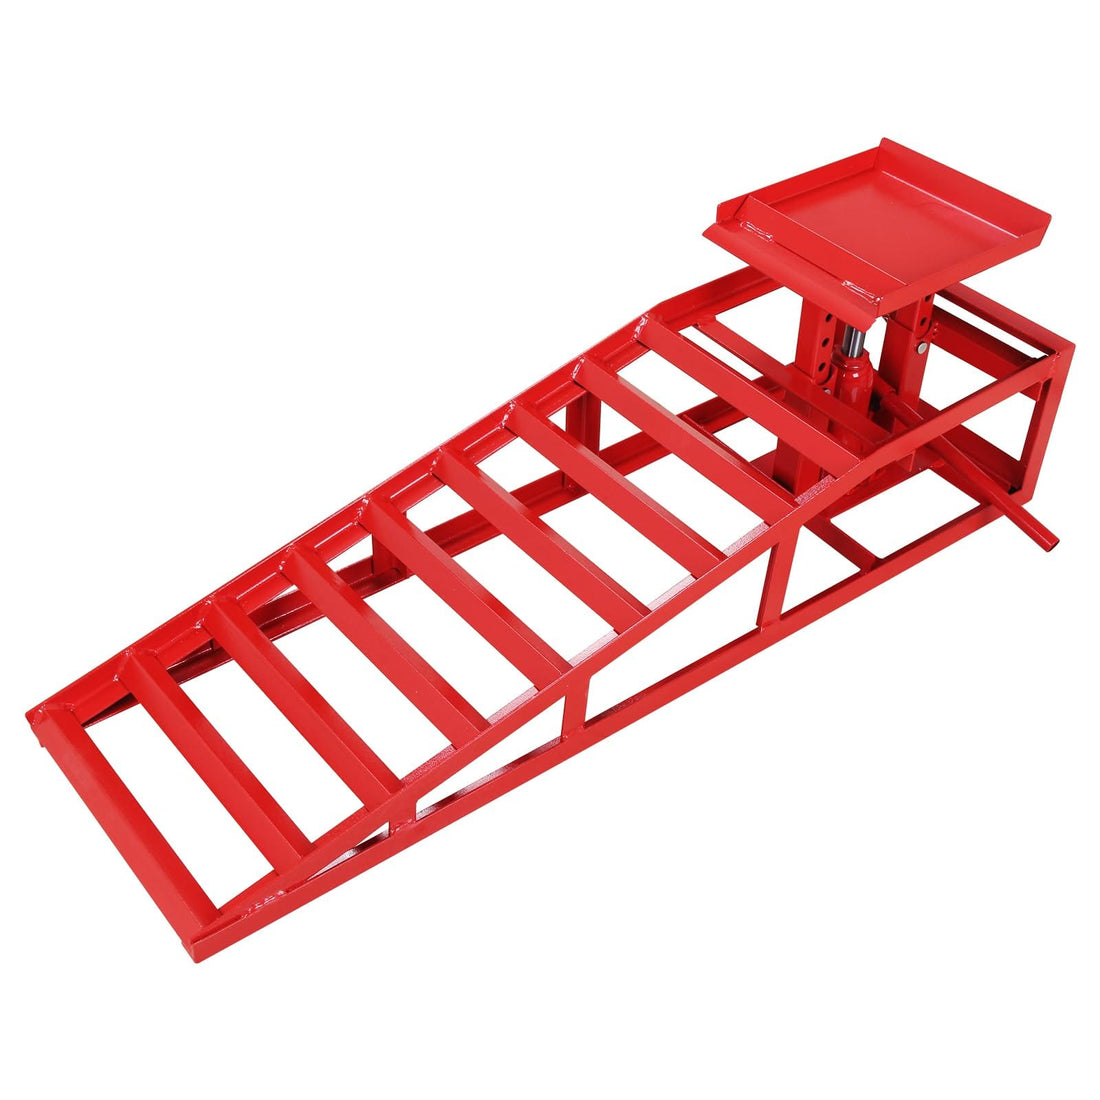 5T 10000lbs Hydraulic Auto Service Ramps, 1 Pack, Garage Red